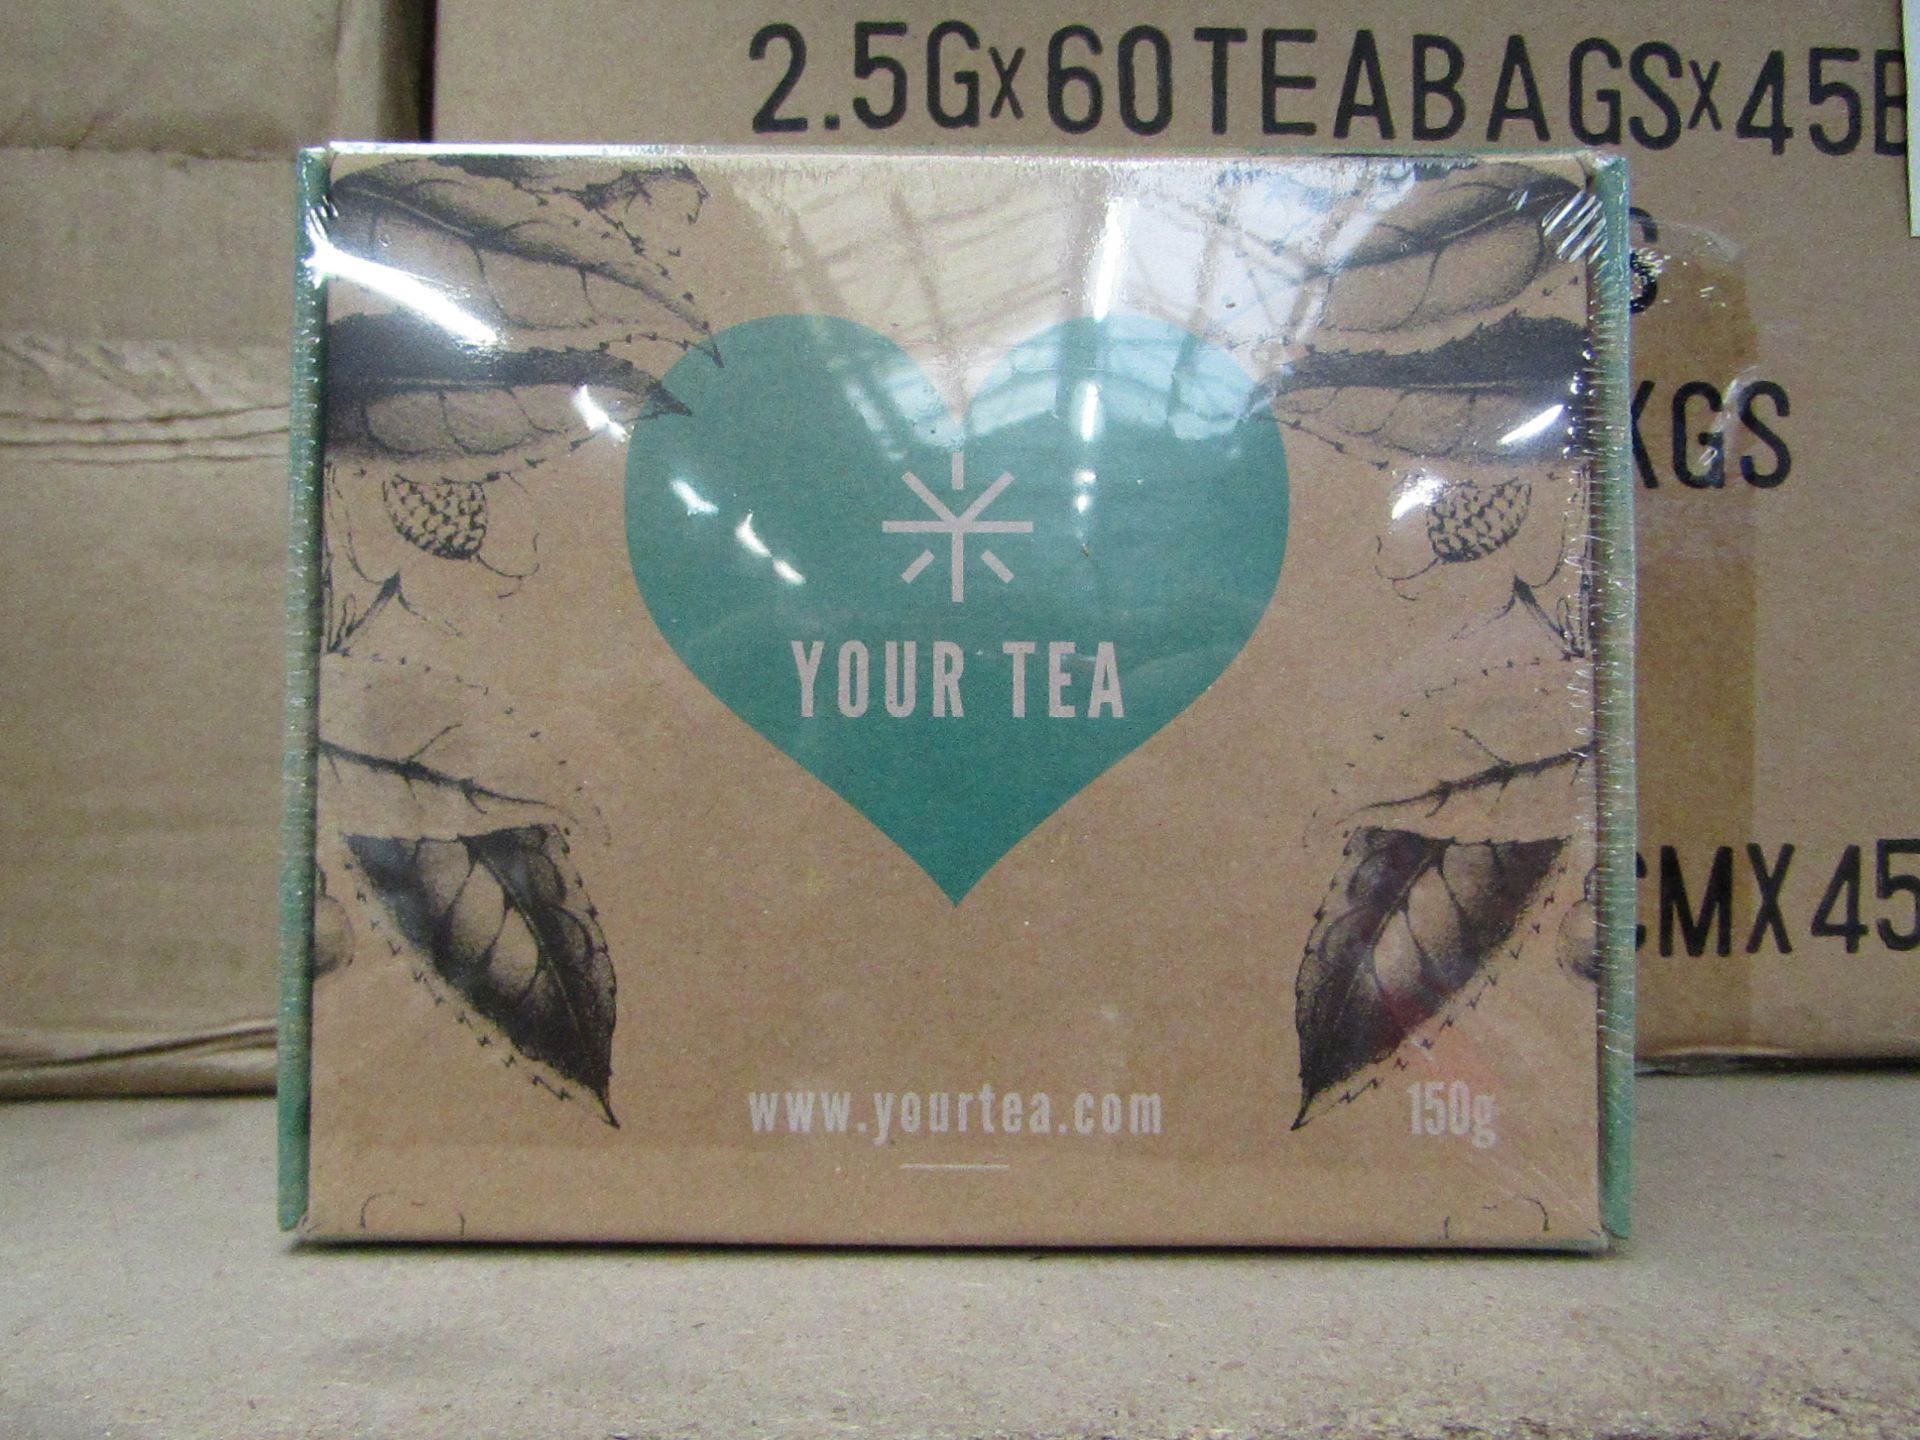 5 x Boxes of Tiny Tea, each box has 84 Tea bags, Best Before 15.5.2019 the boxes are still sealed